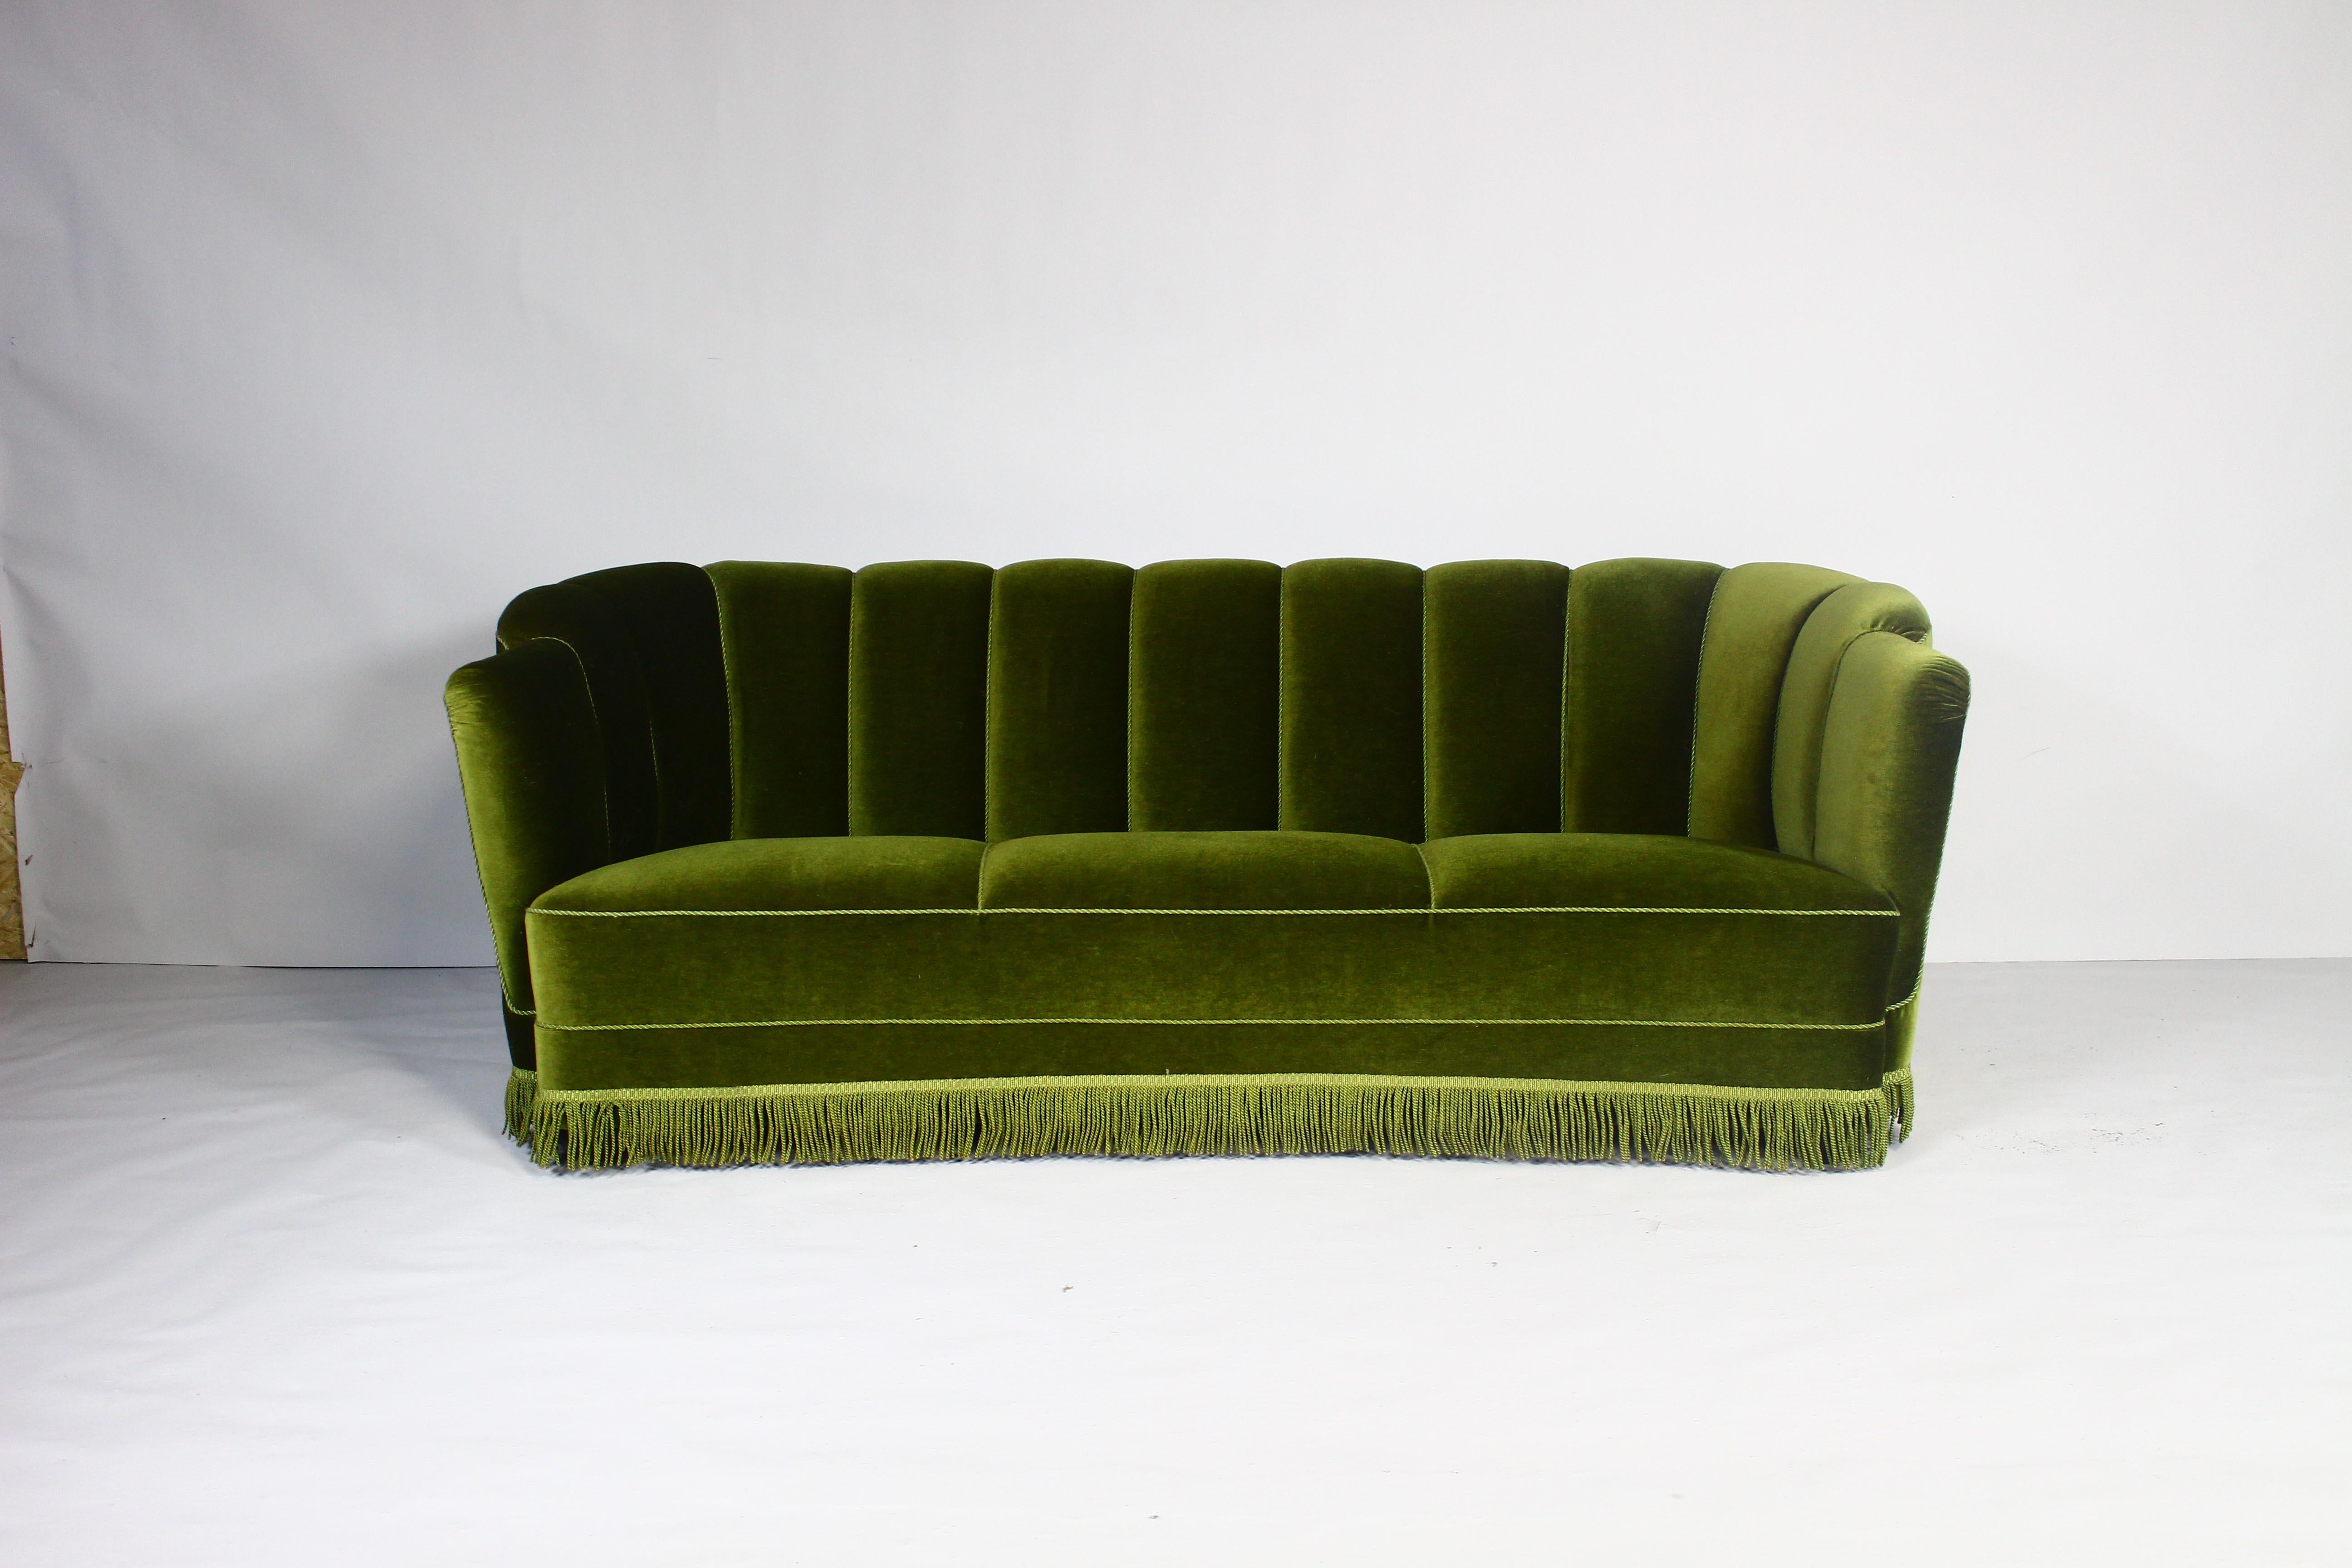 This beautiful Danish three-seater sofa recalls the Art Deco style of the 1930s with the recognizable touch of Danish Modernism.
Thanks to its elegantly curved shape, this type of sofa is often referred to as the “banana” style,
which not only